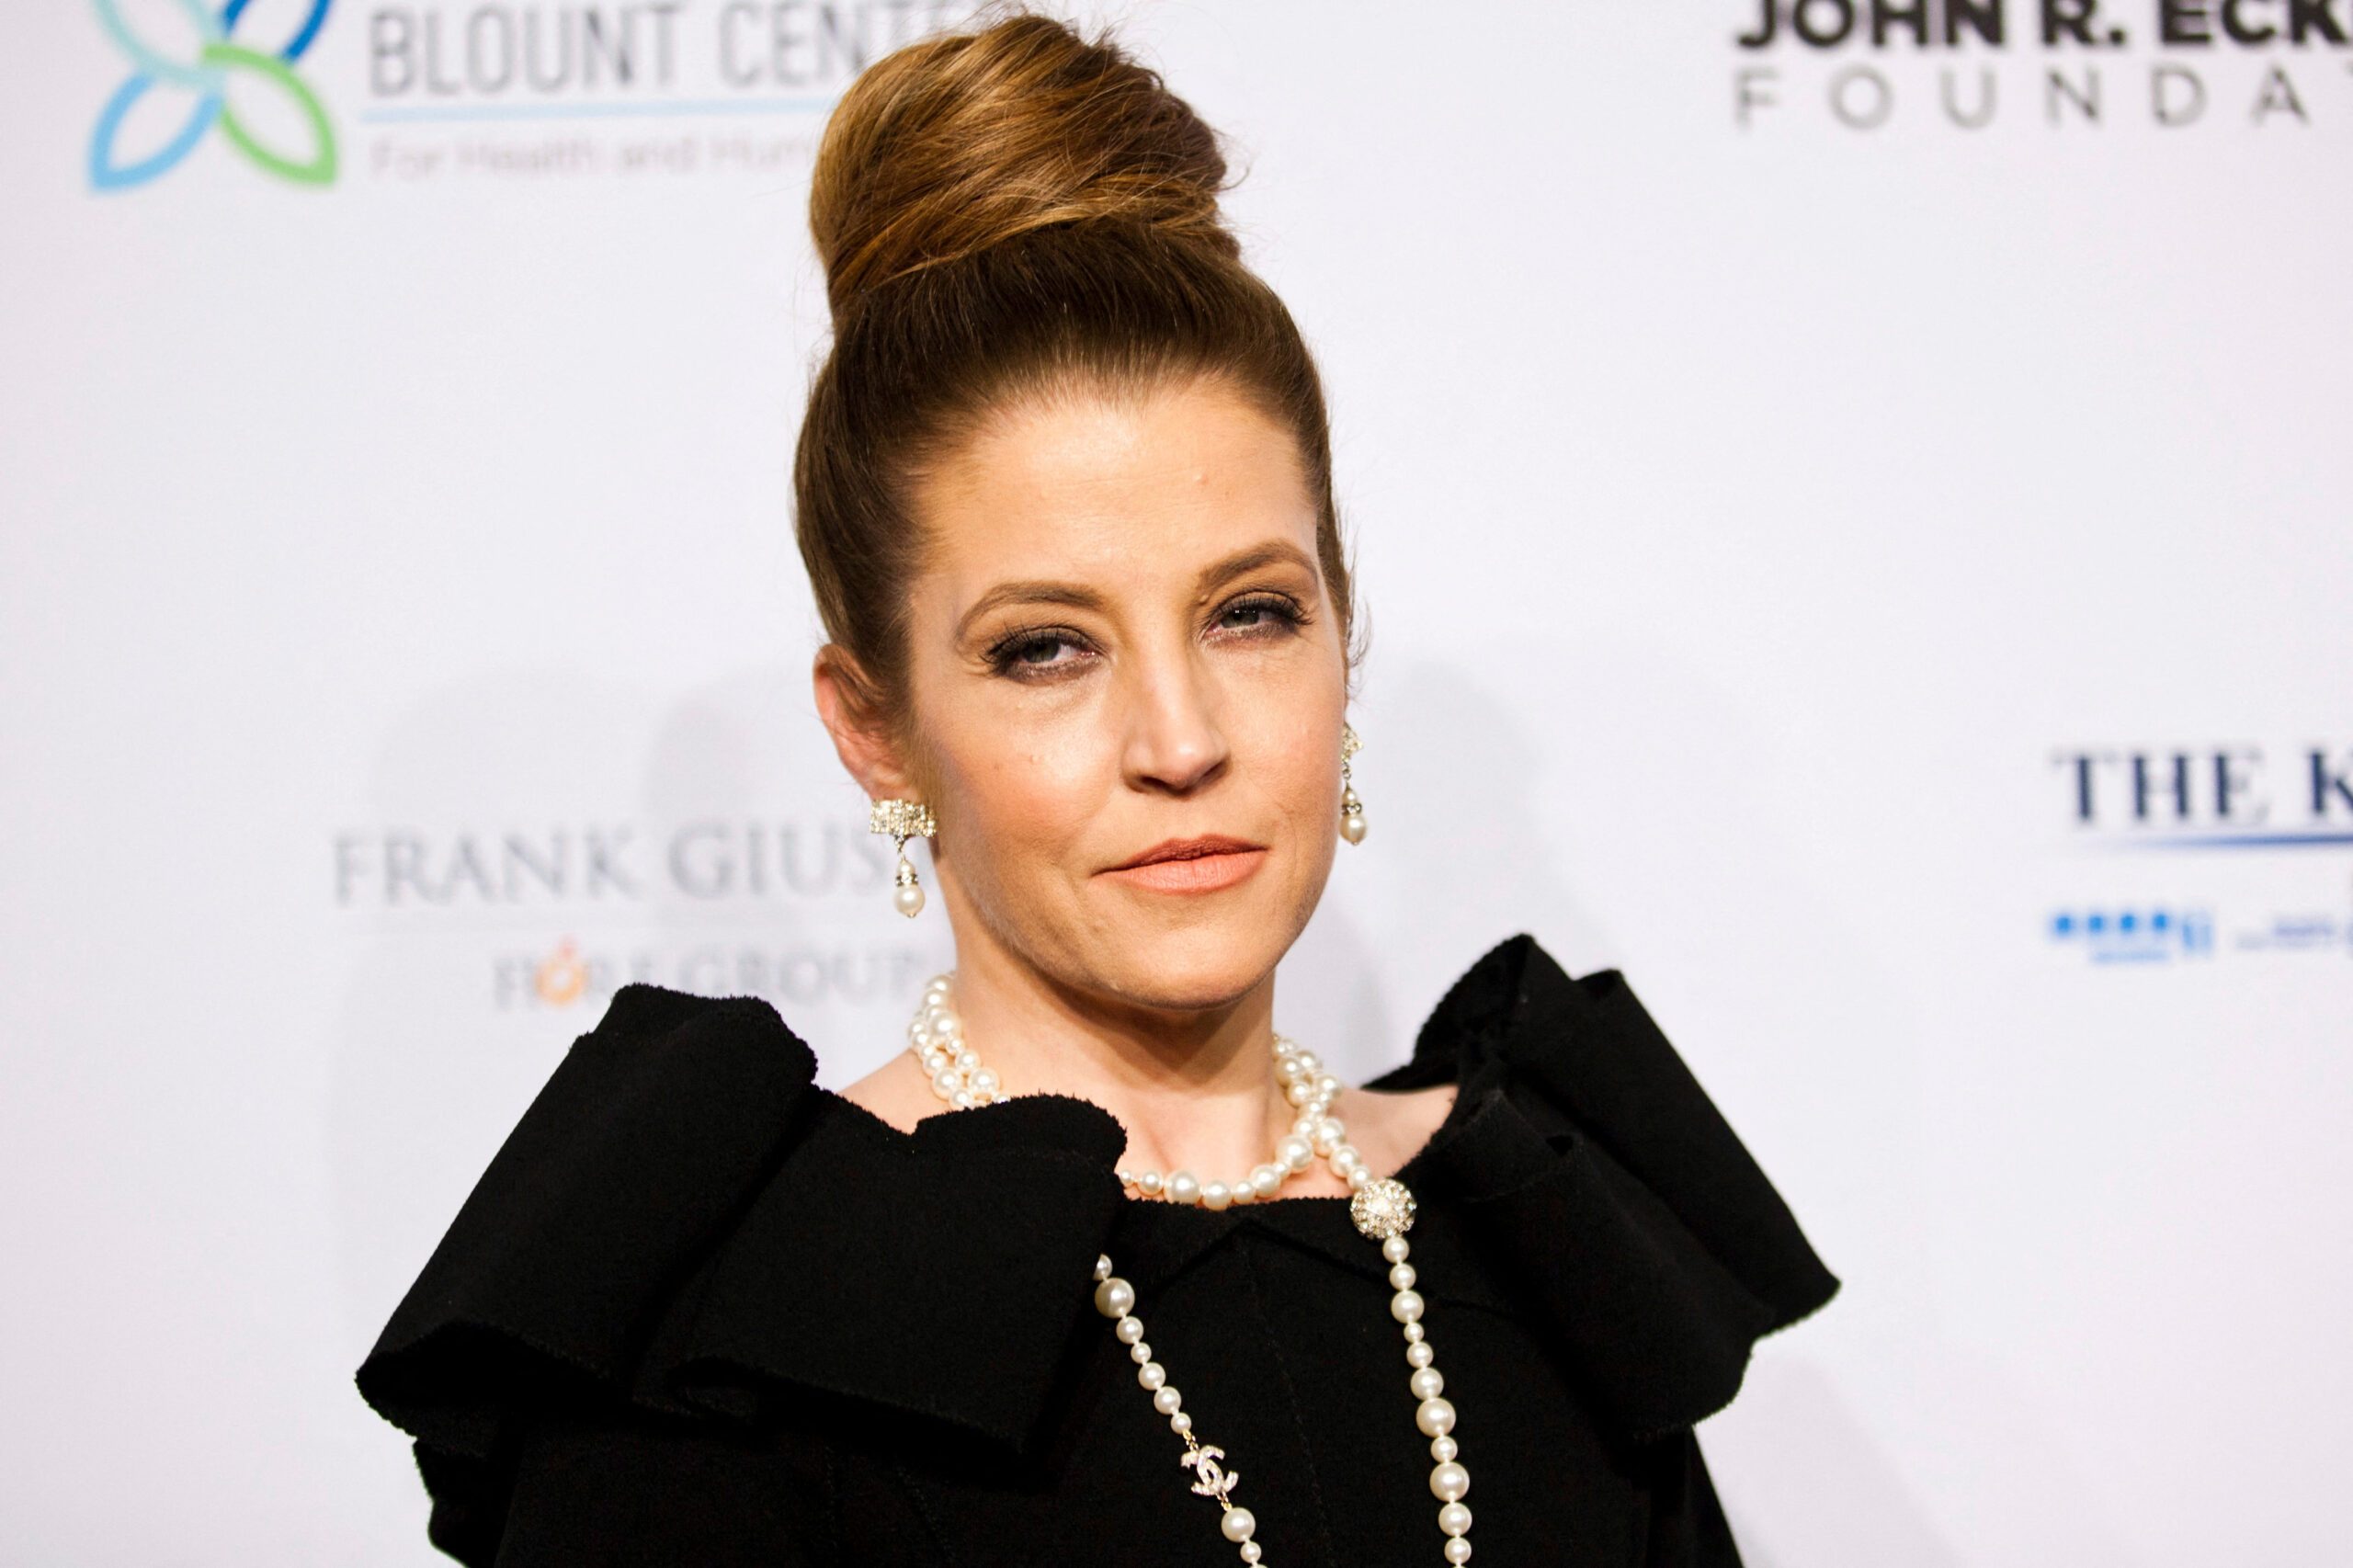 Lisa Marie Presley to be laid to rest at Graceland